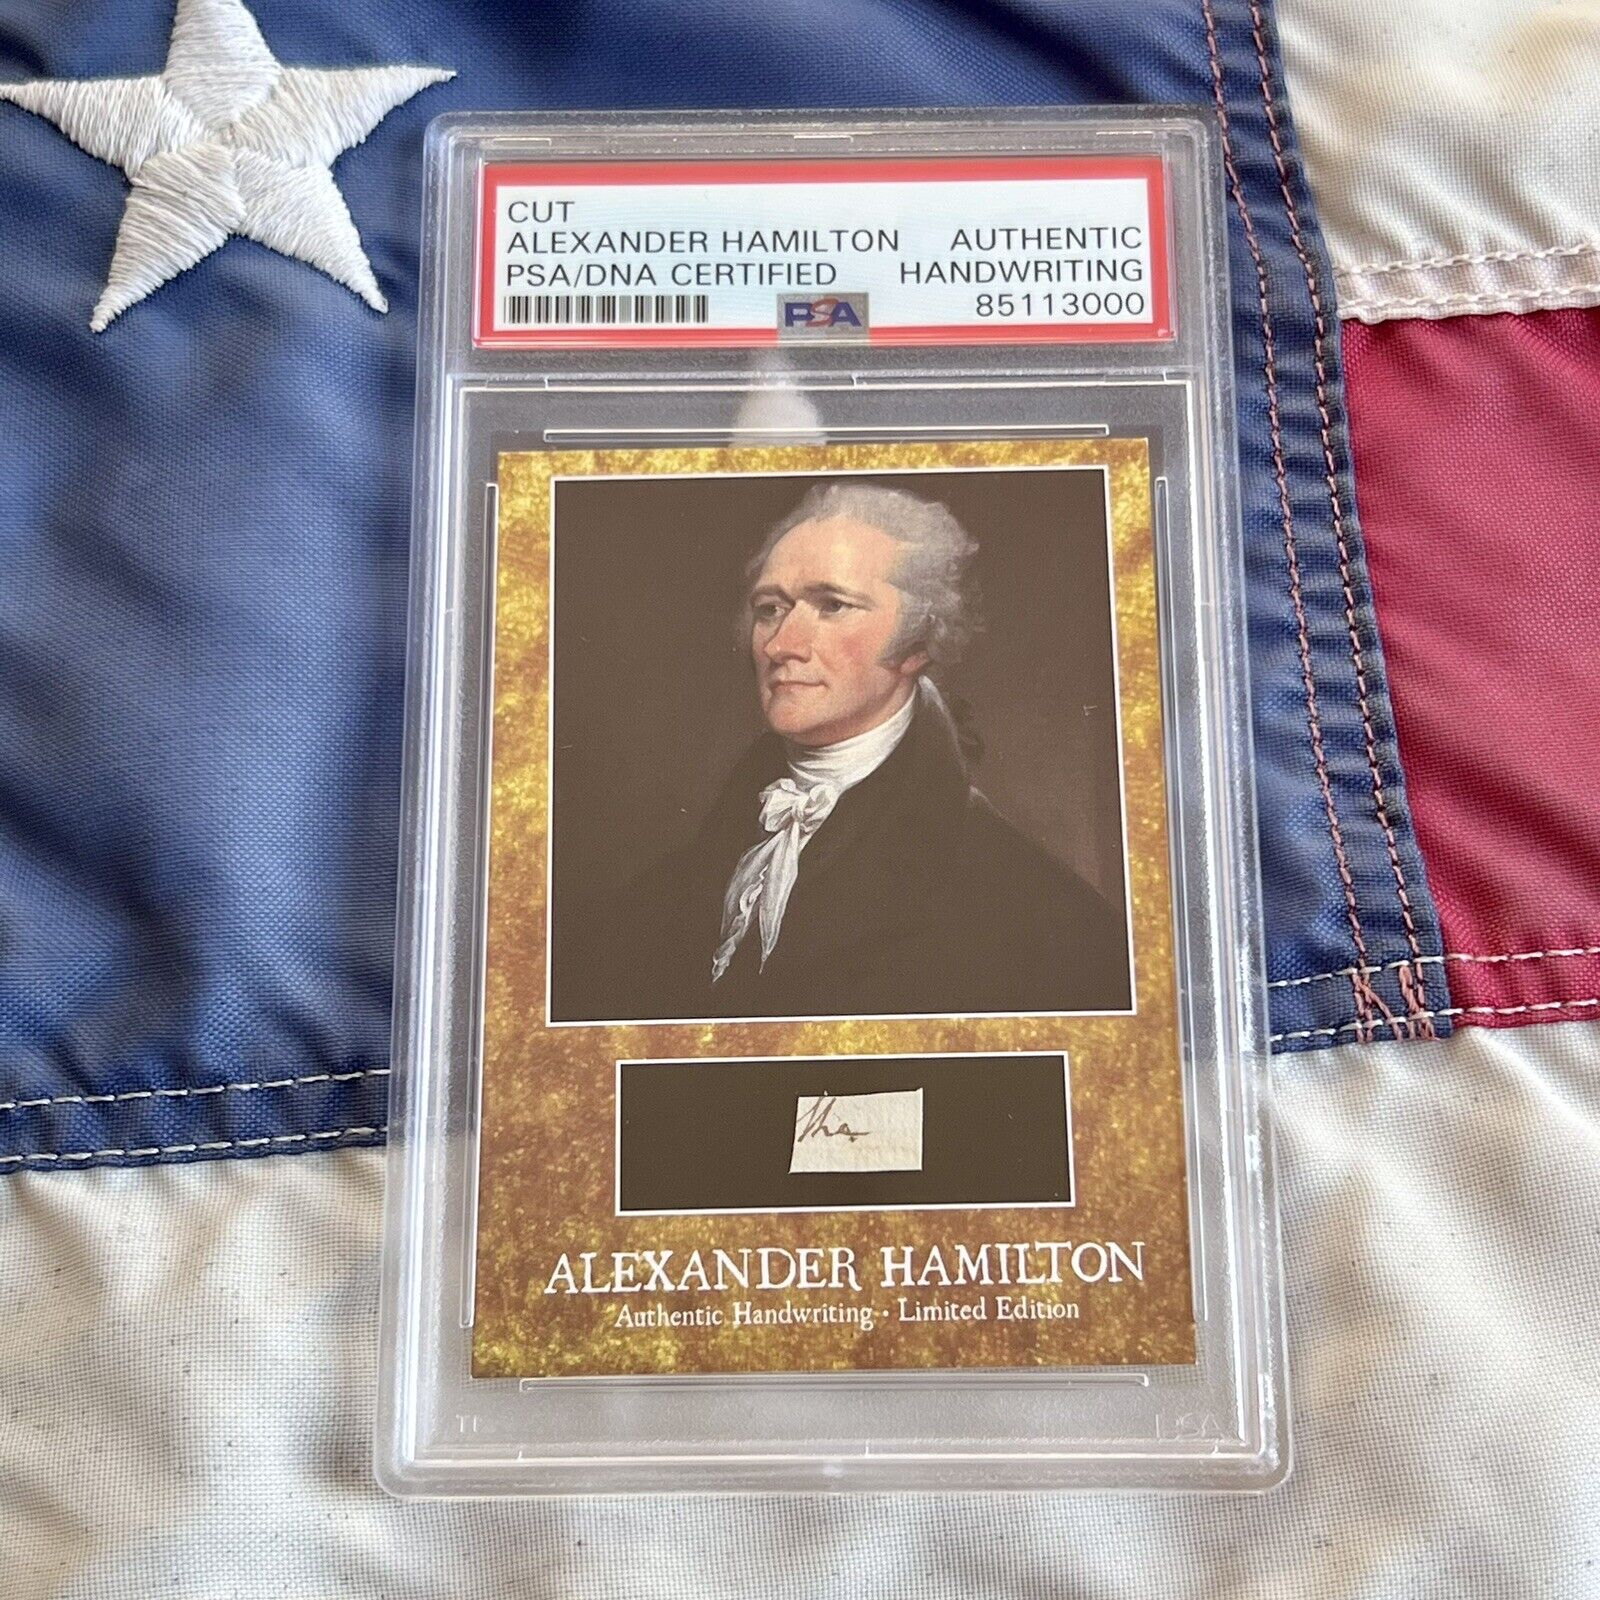 Alexander Hamilton Handwritten Word Removed From a PSA Autograph Signed ...